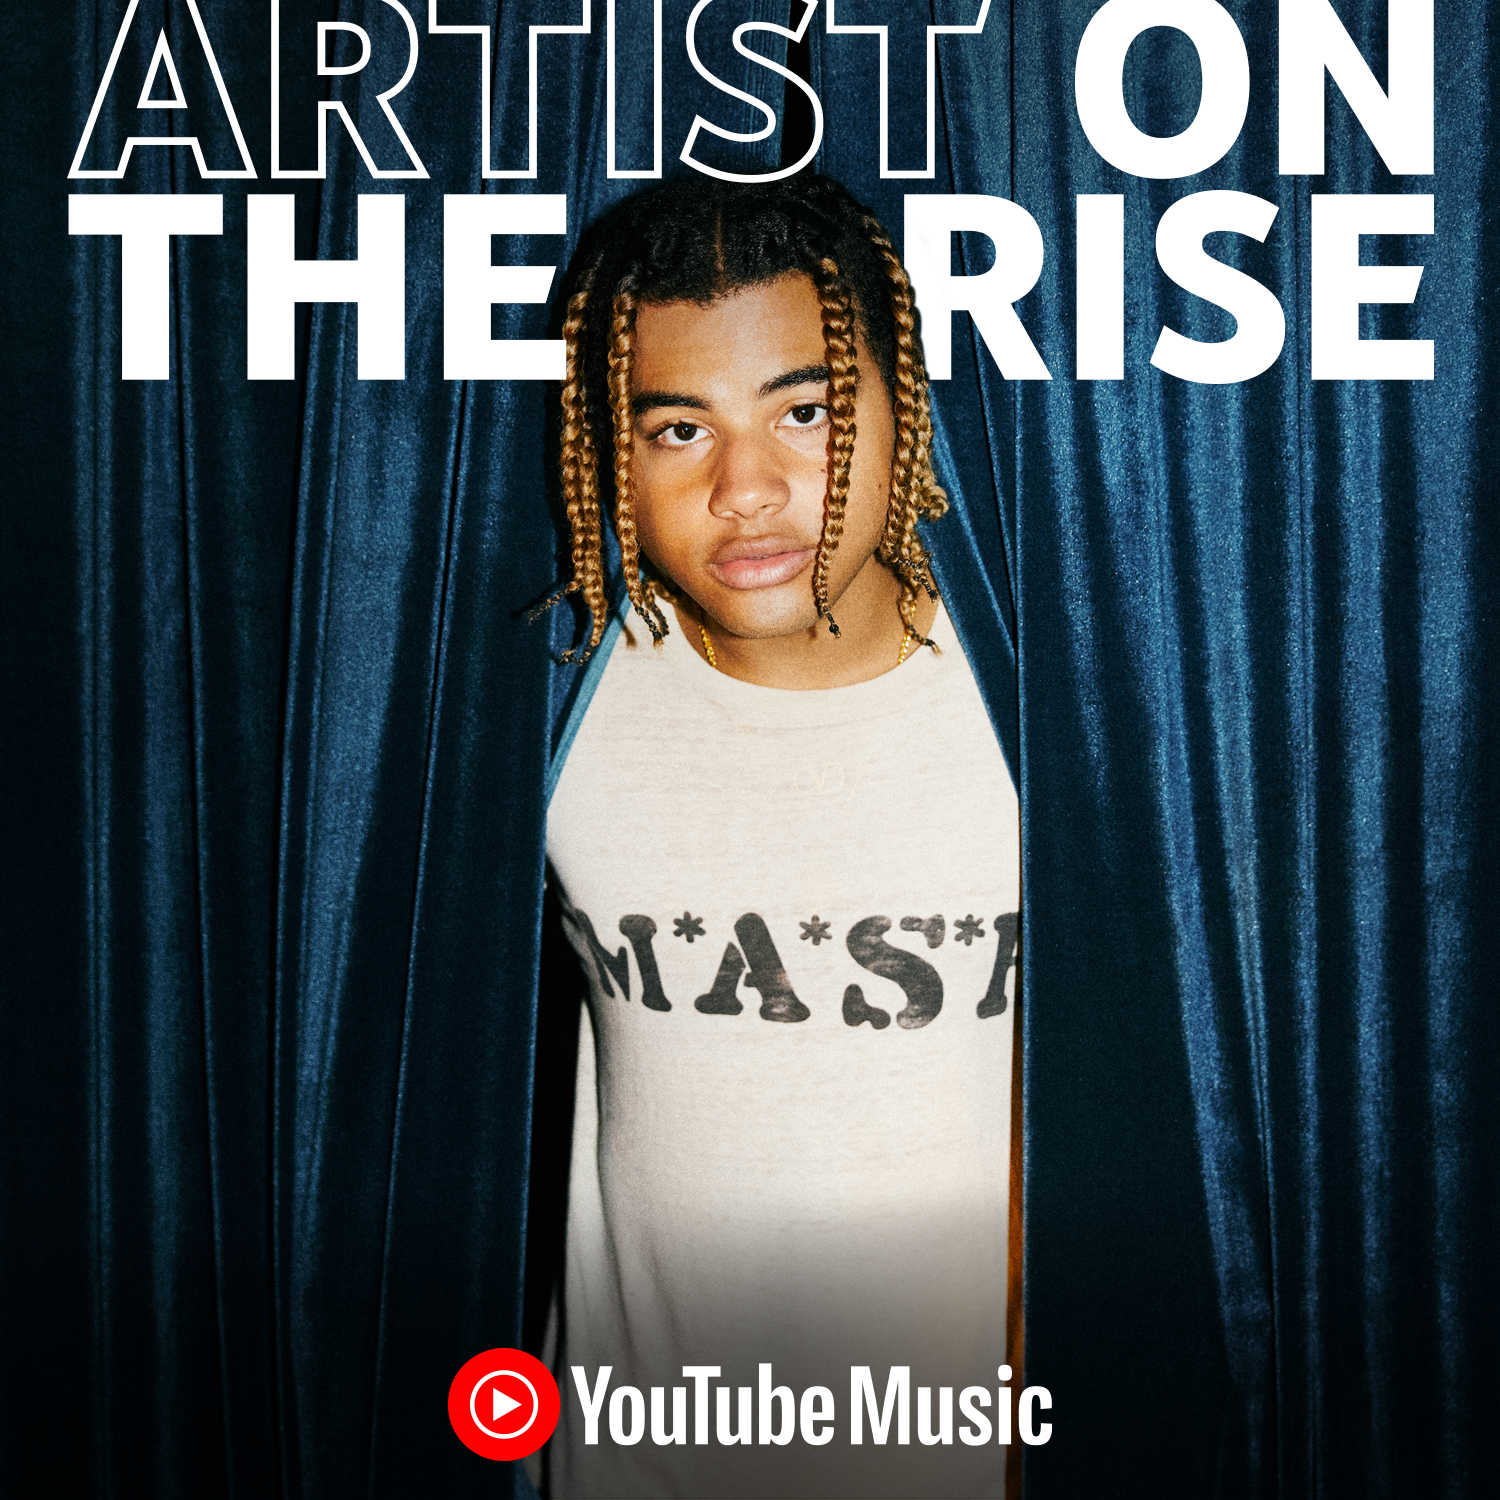 YouTube Music debuts 24kGoldn�s Artist on the Rise documentary